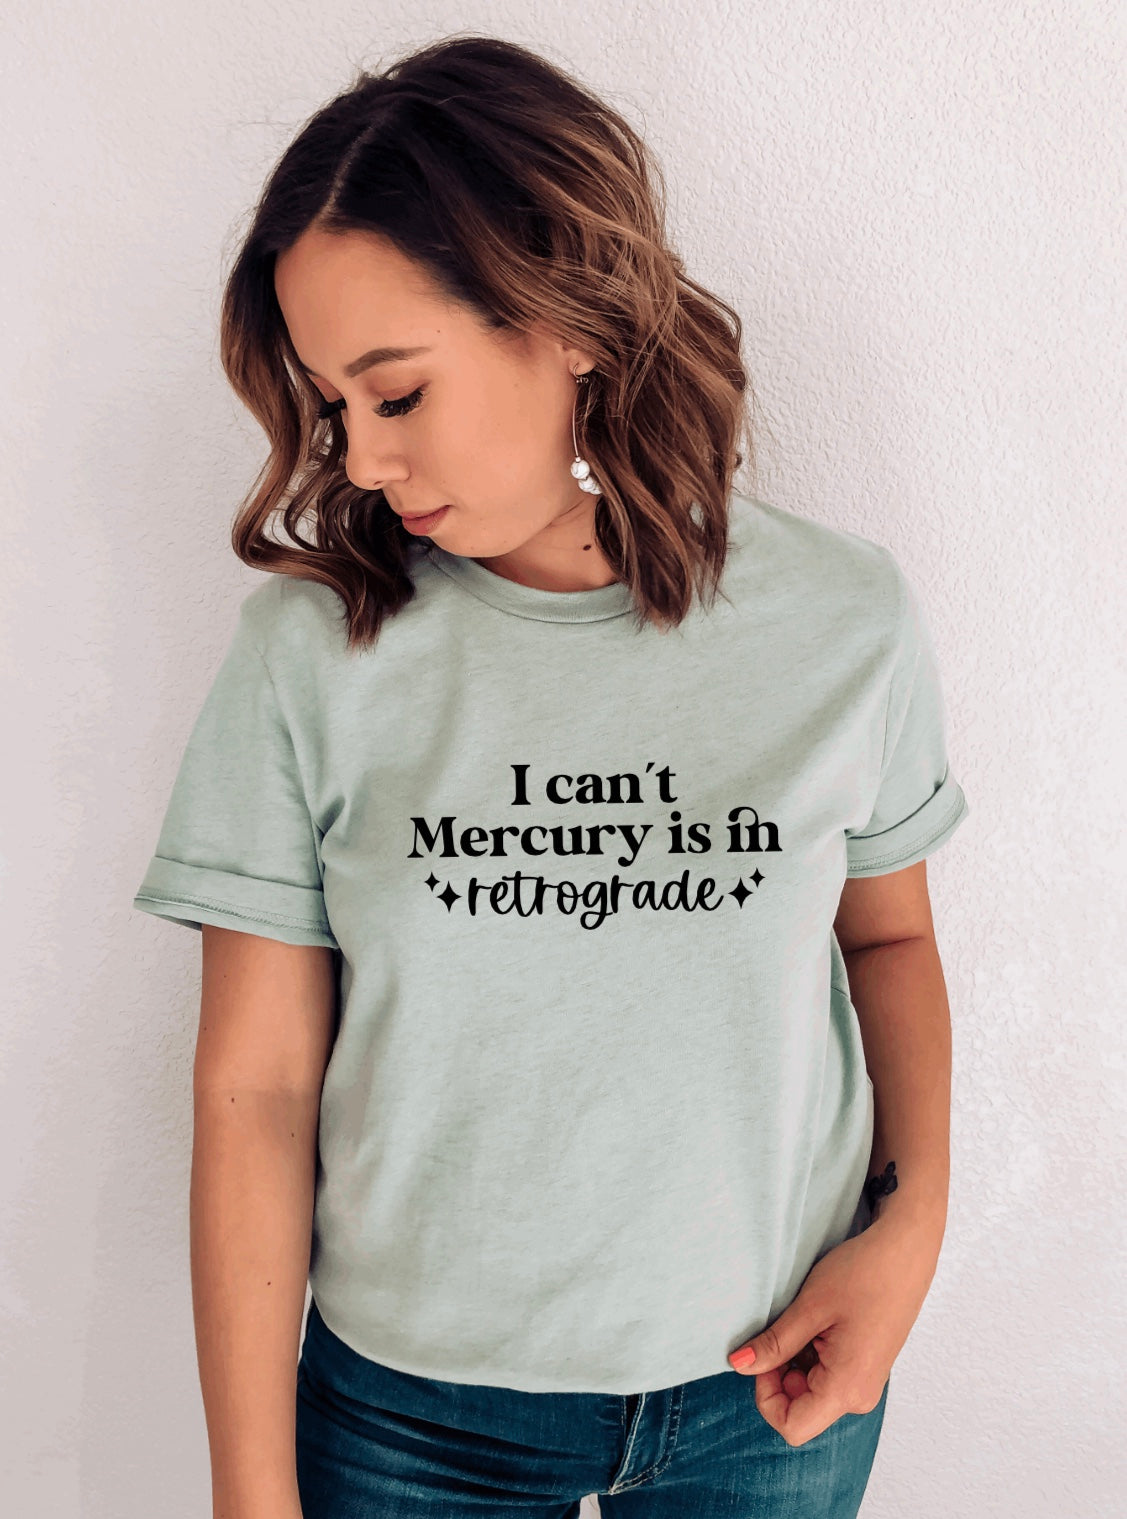 I can’t Mercury is in Retrograde t-shirt